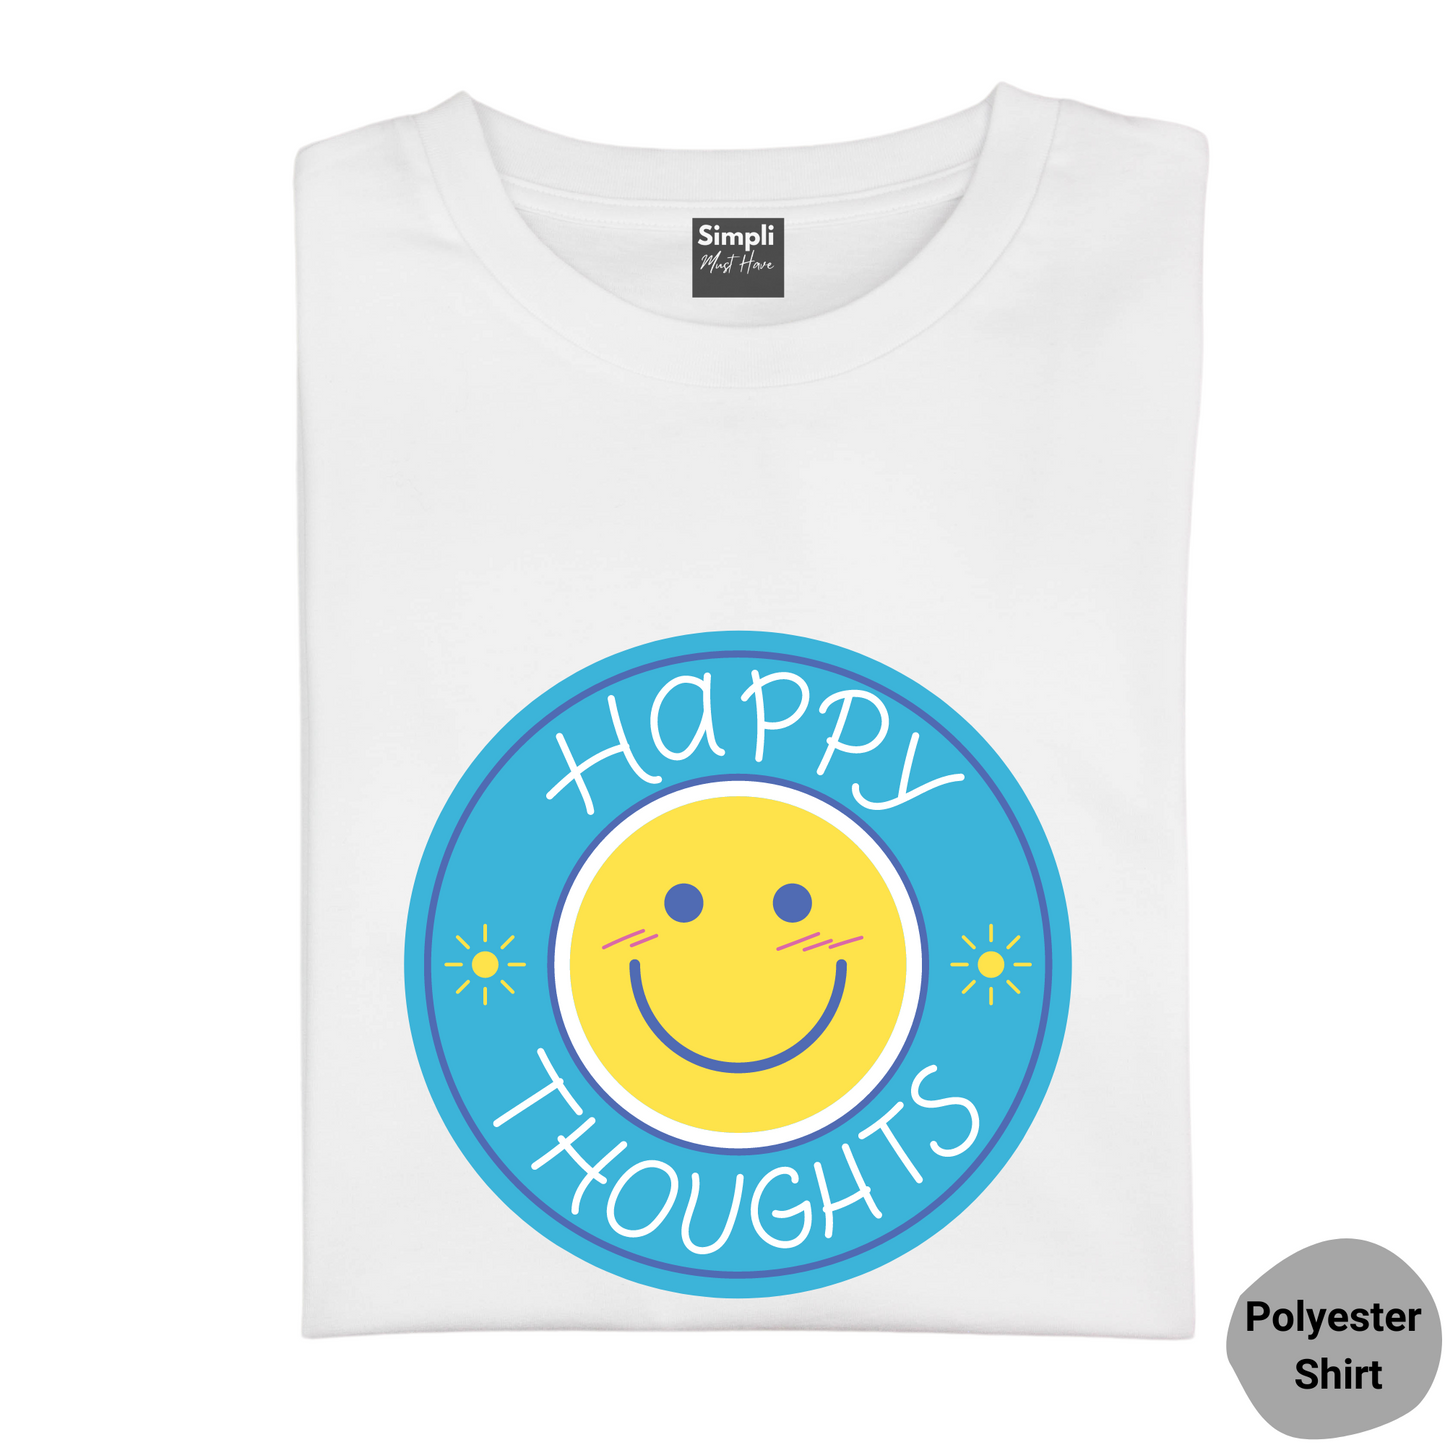 Happy Thoughts Tshirt